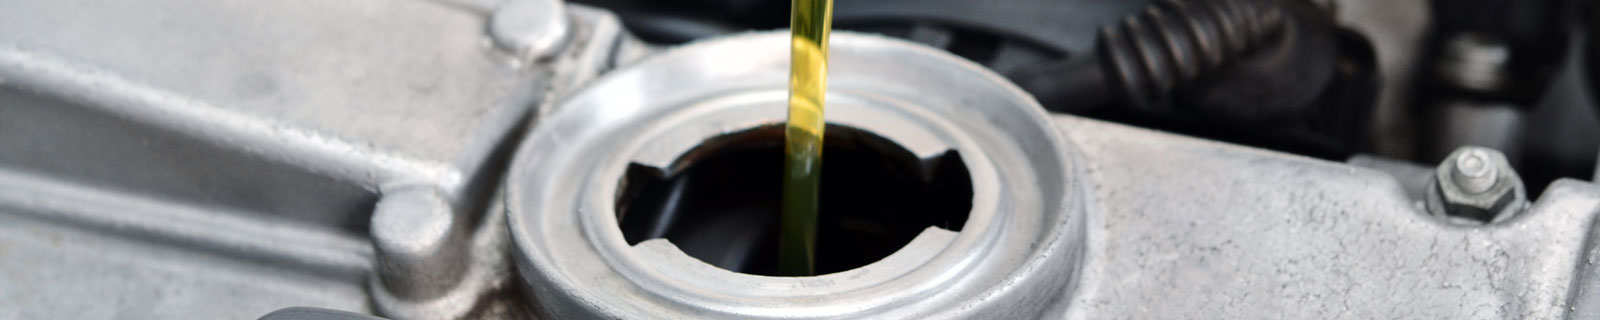 Automotive Oils & Greases